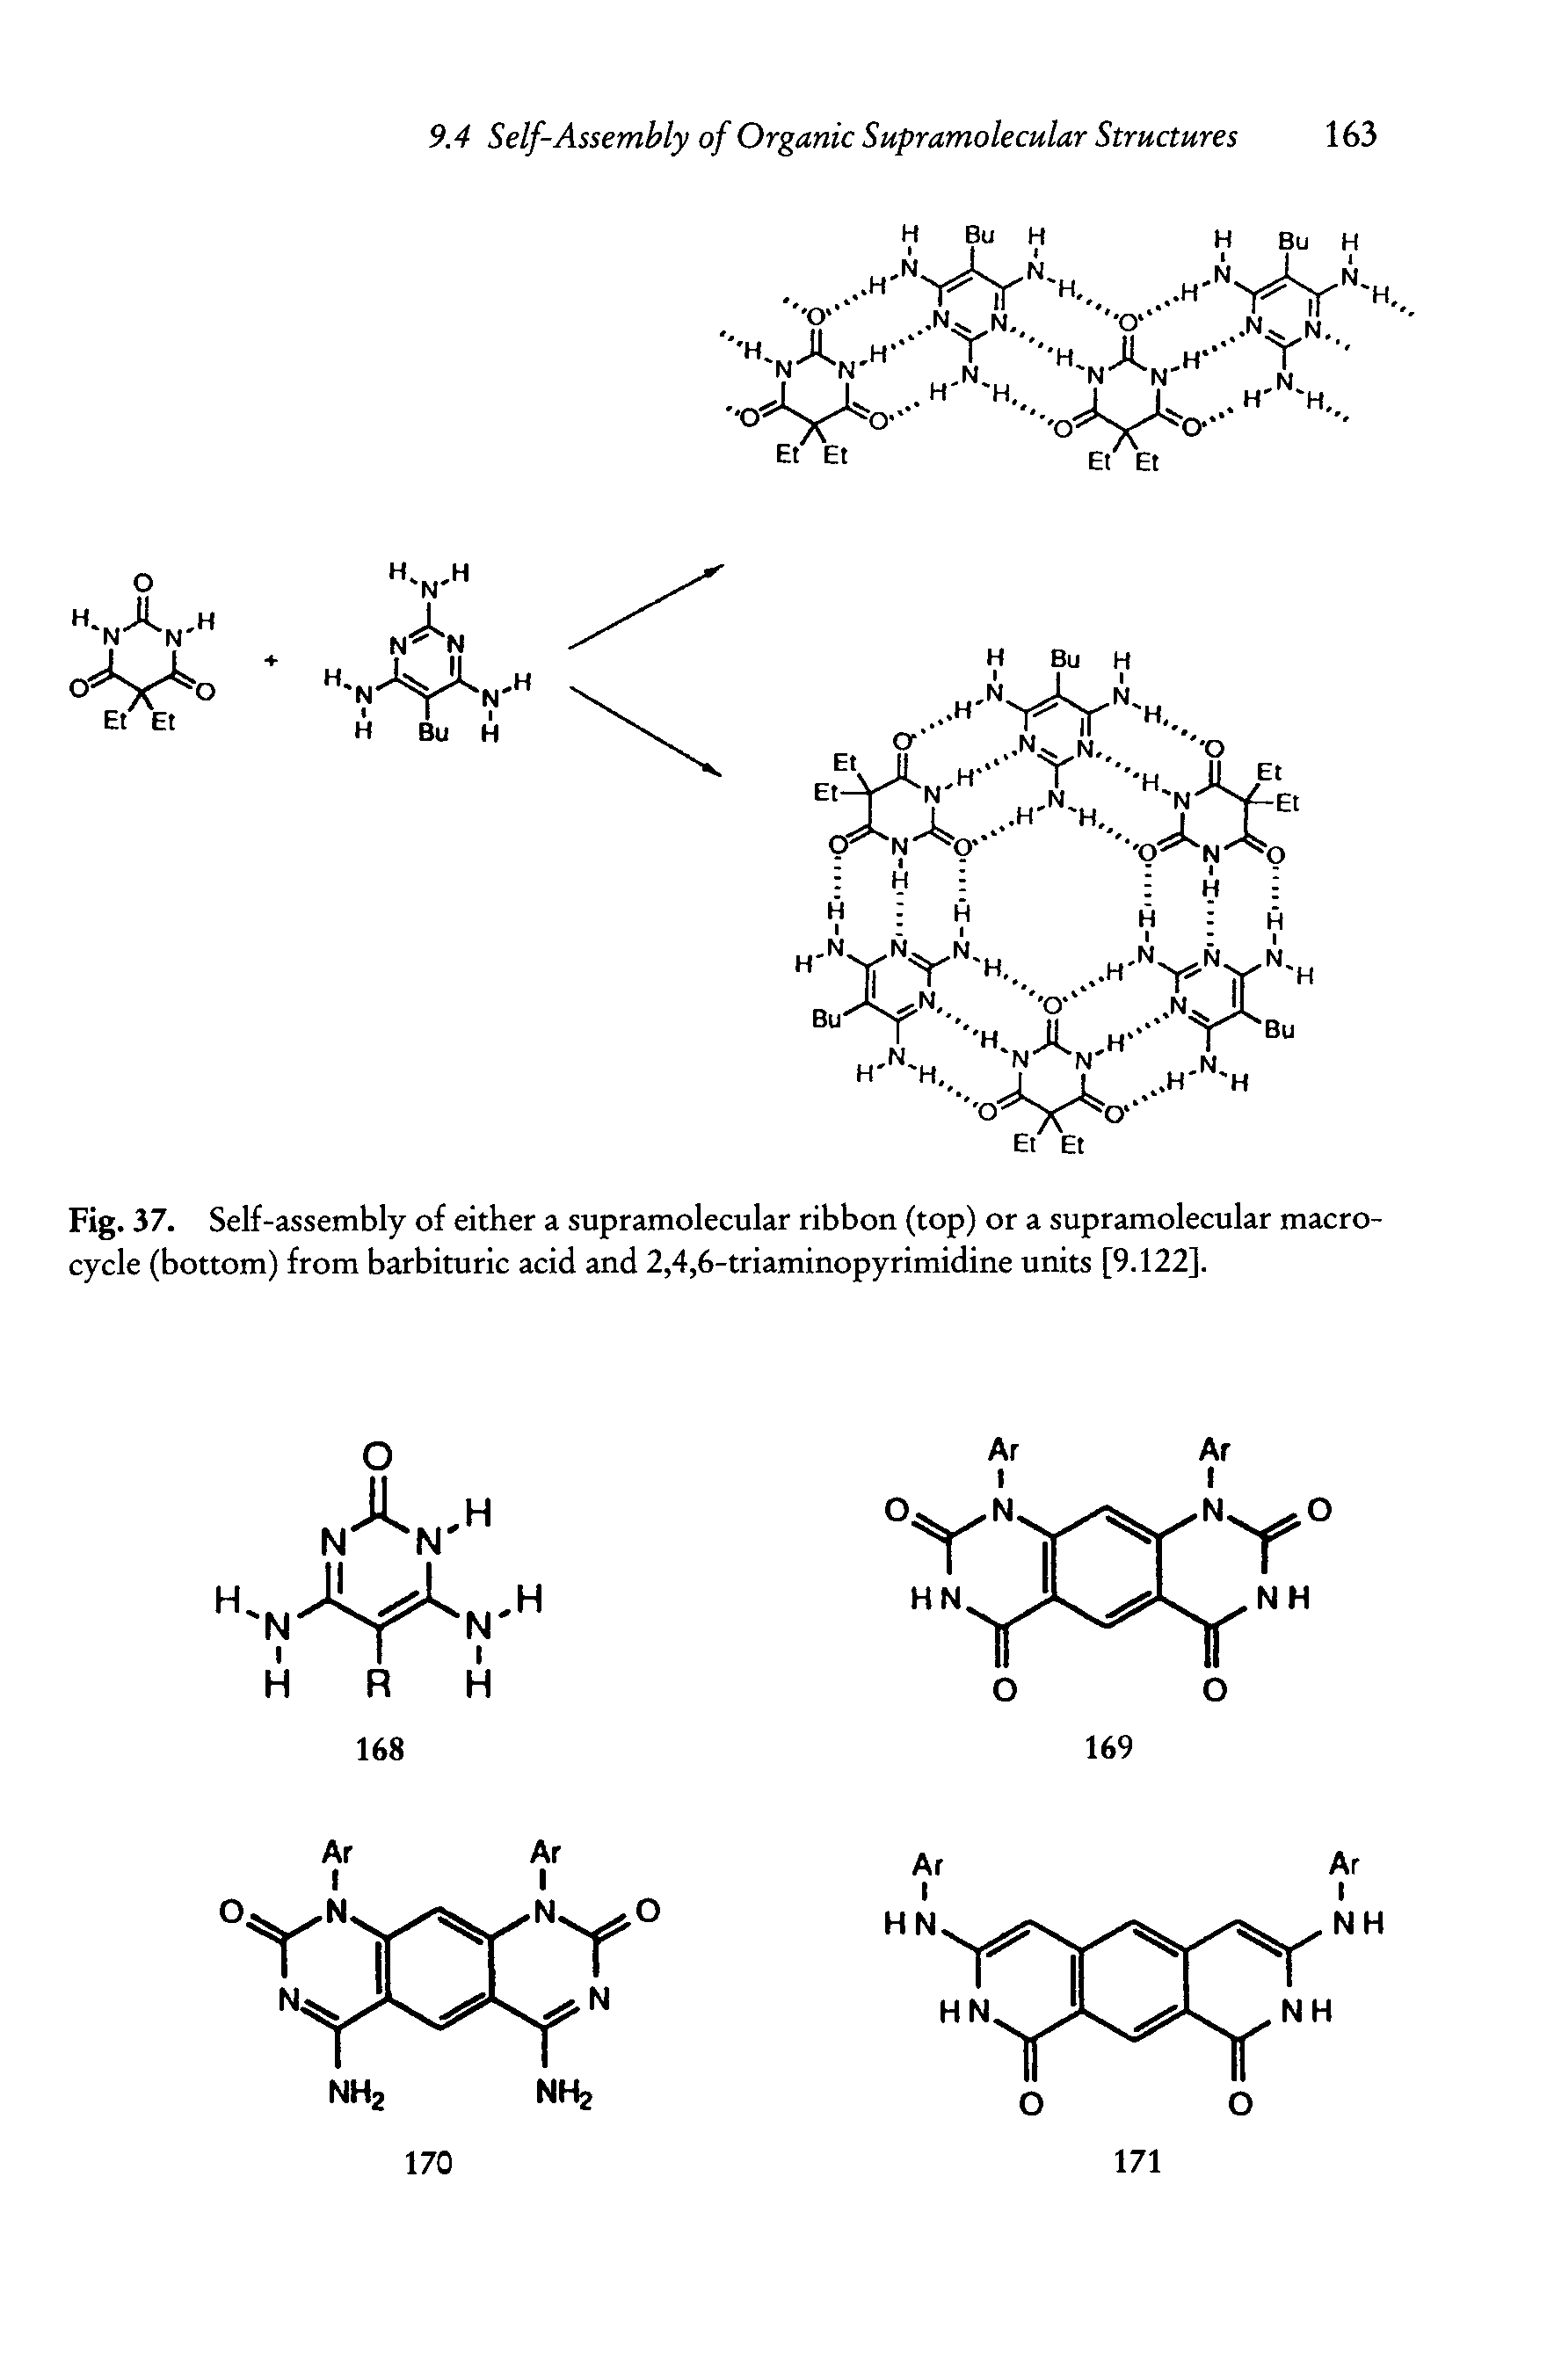 Fig. 37. Self-assembly of either a supramolecular ribbon (top) or a supramolecular macrocycle (bottom) from barbituric acid and 2,4,6-triaminopyrimidine units [9.122].